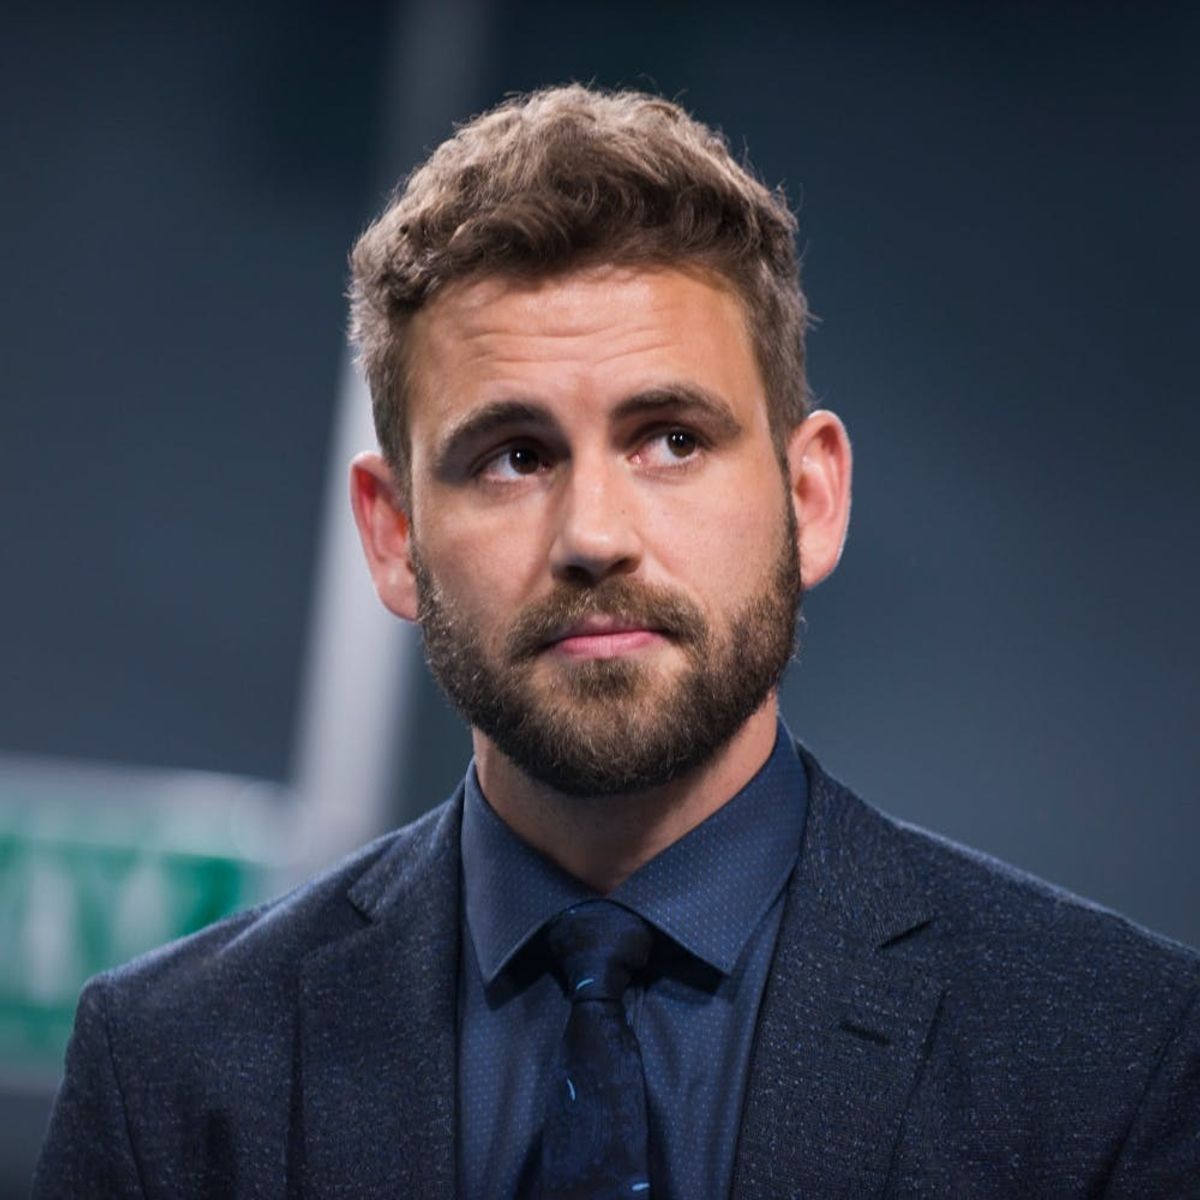 People Are Making Fun of Bachelor Nick Viall for (Fake?) Crying